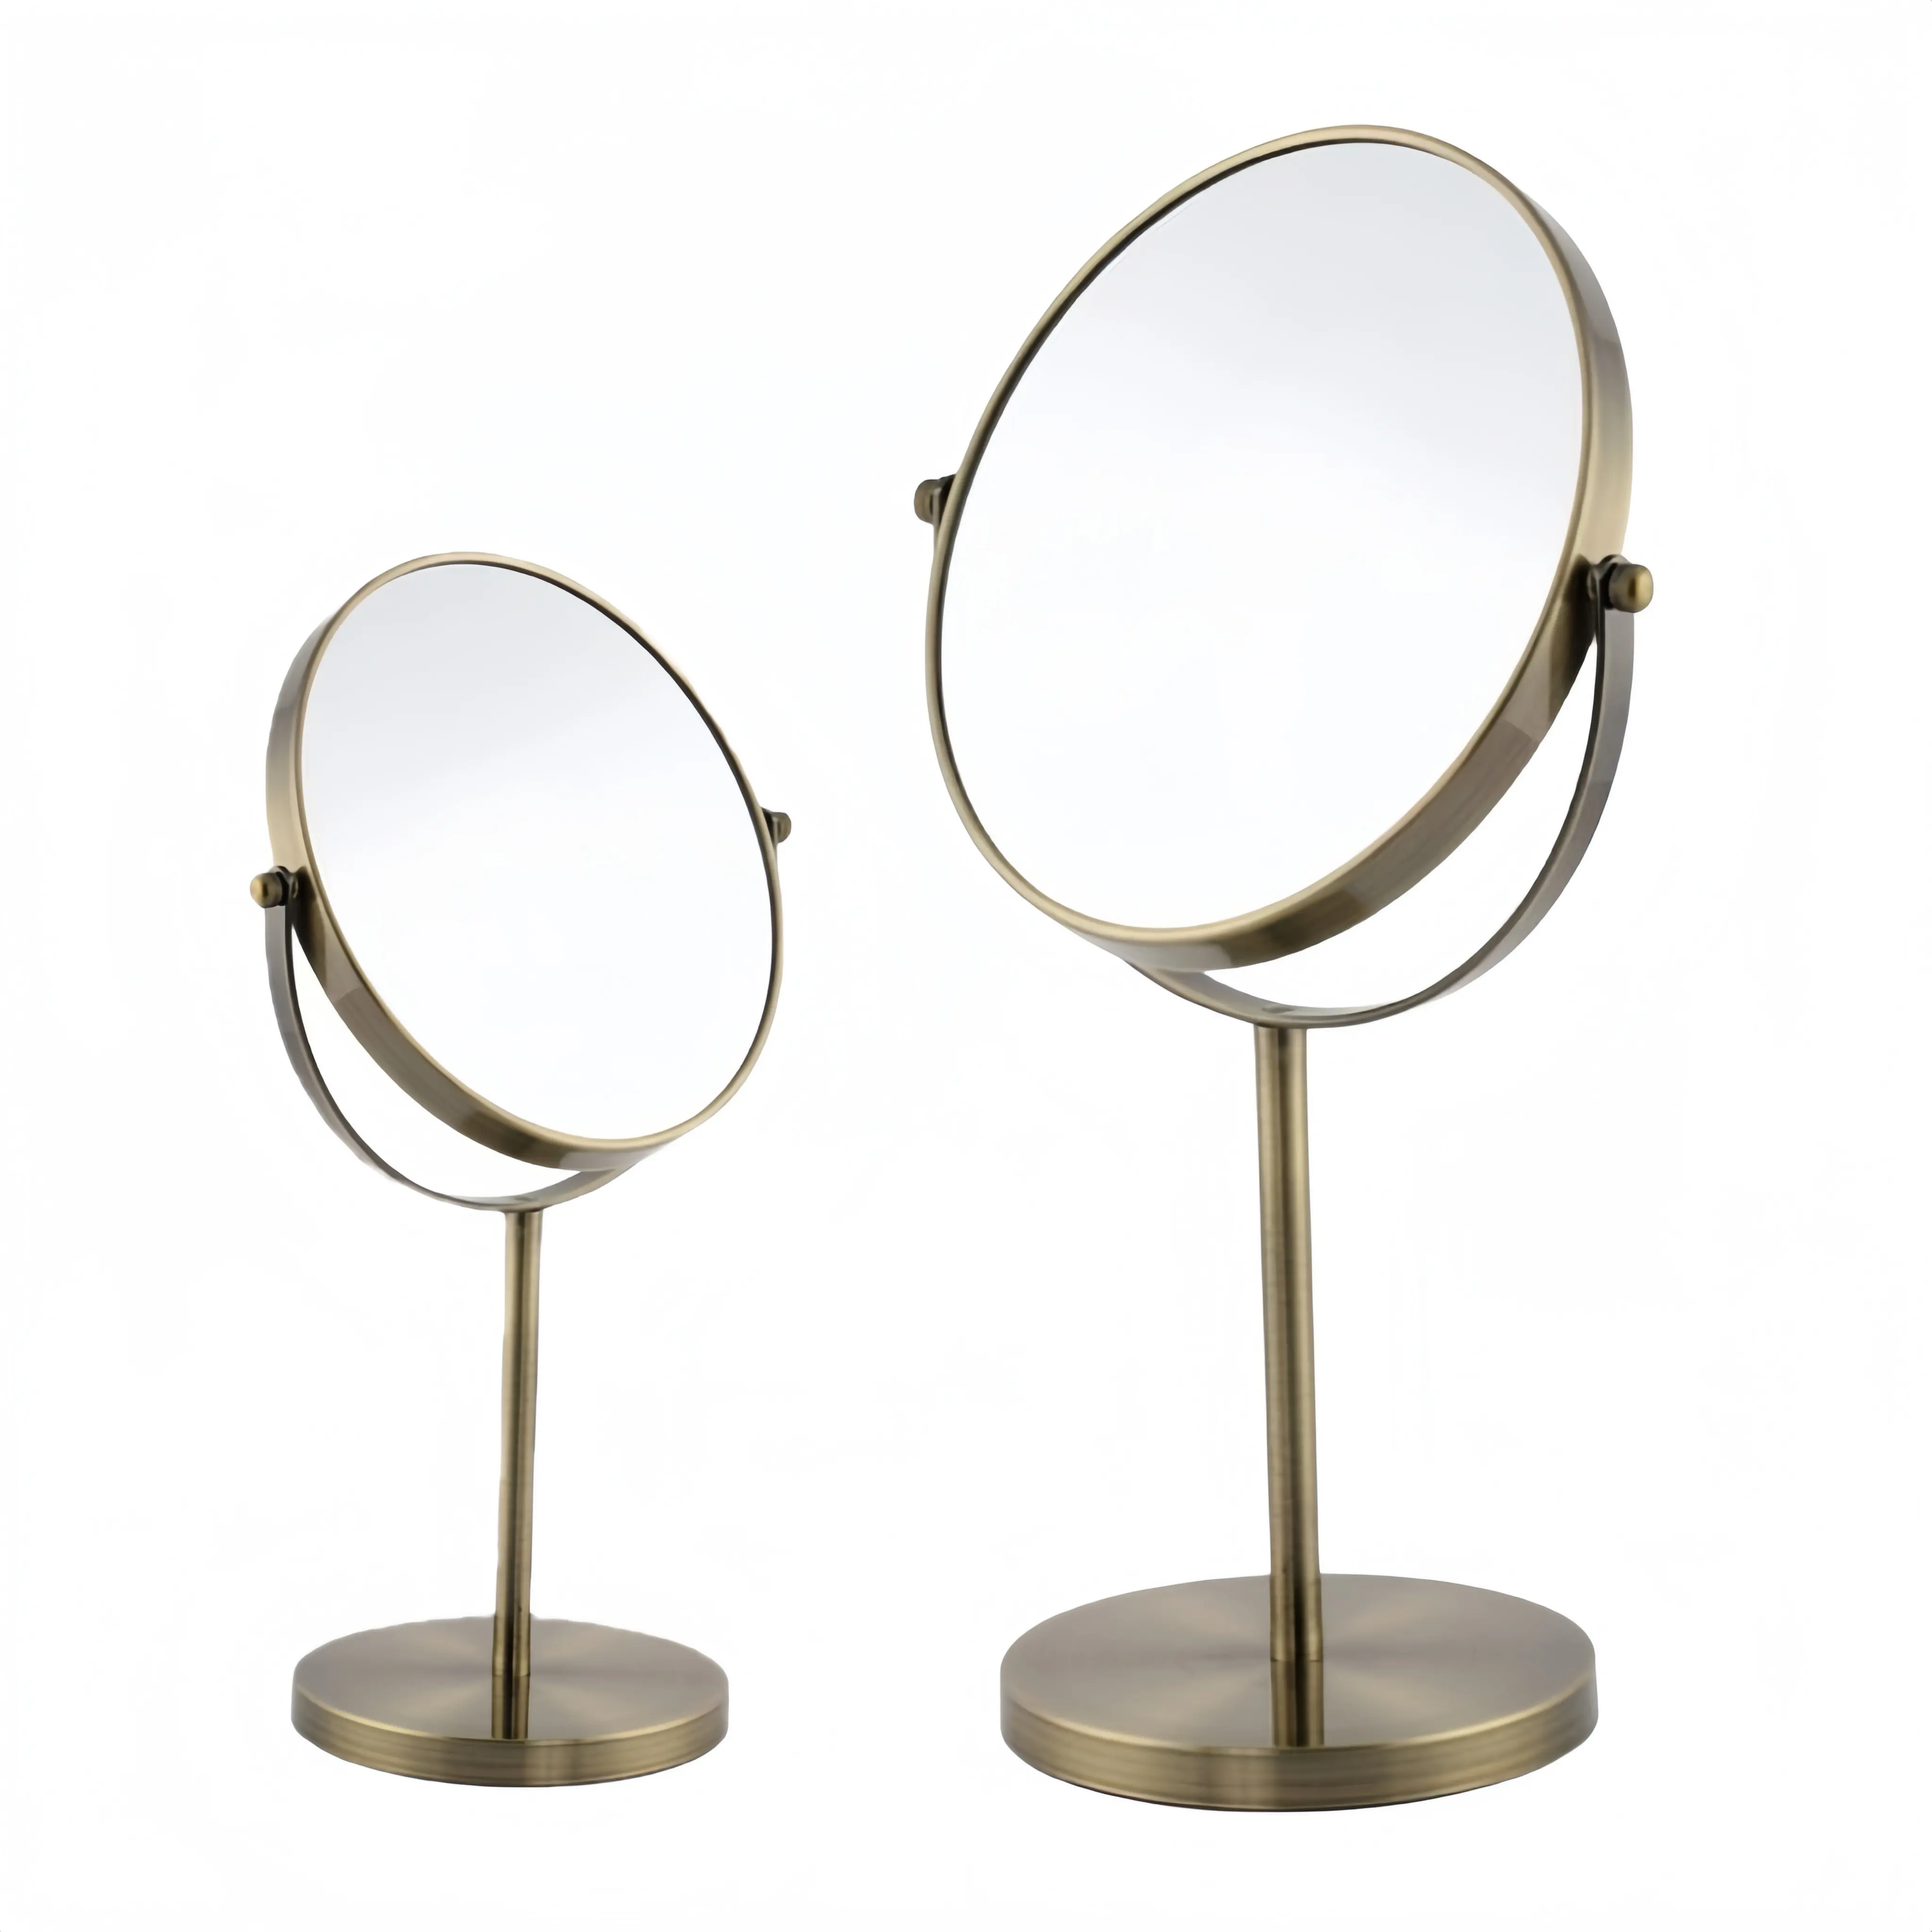 Hot Selling High-end High-quality Cosmetic Mirror Professional Make up Table Golden Hotel Vanity Mirror Zinc Alloy